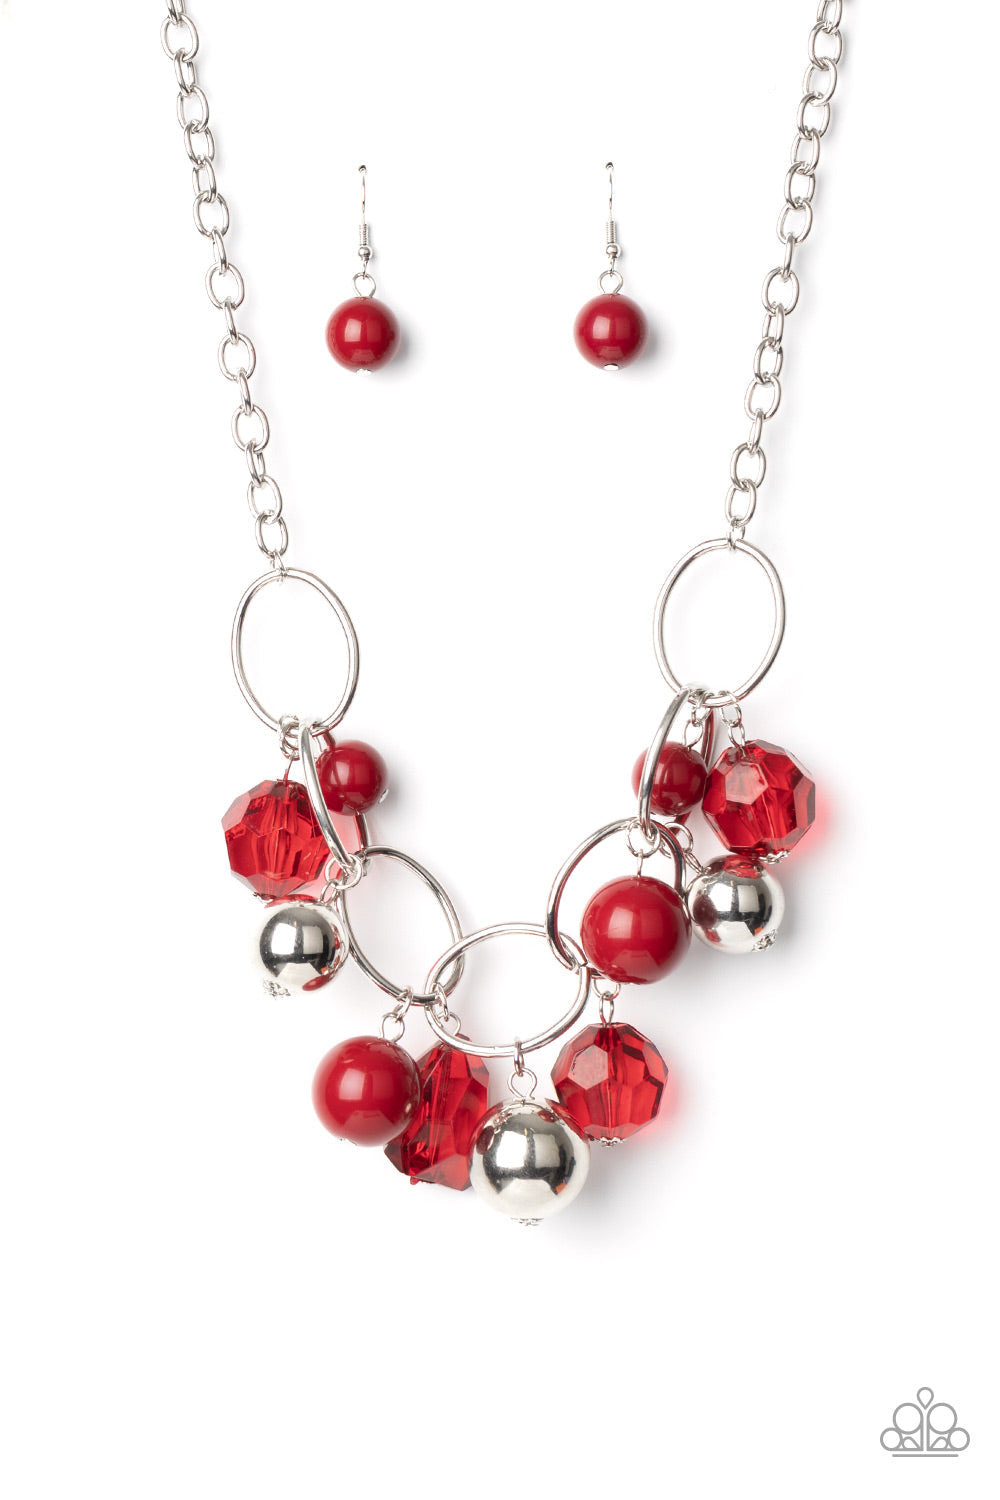 Cosmic Getaway - Red and Silver Necklace - Paparazzi Jewelry - Infused with faceted Samba crystal-like beads, a bubbly collection of oversized silver and Samba beads swing from the bottom of an interconnected row of bold silver oval frames, creating a colorful fringe below the collar.